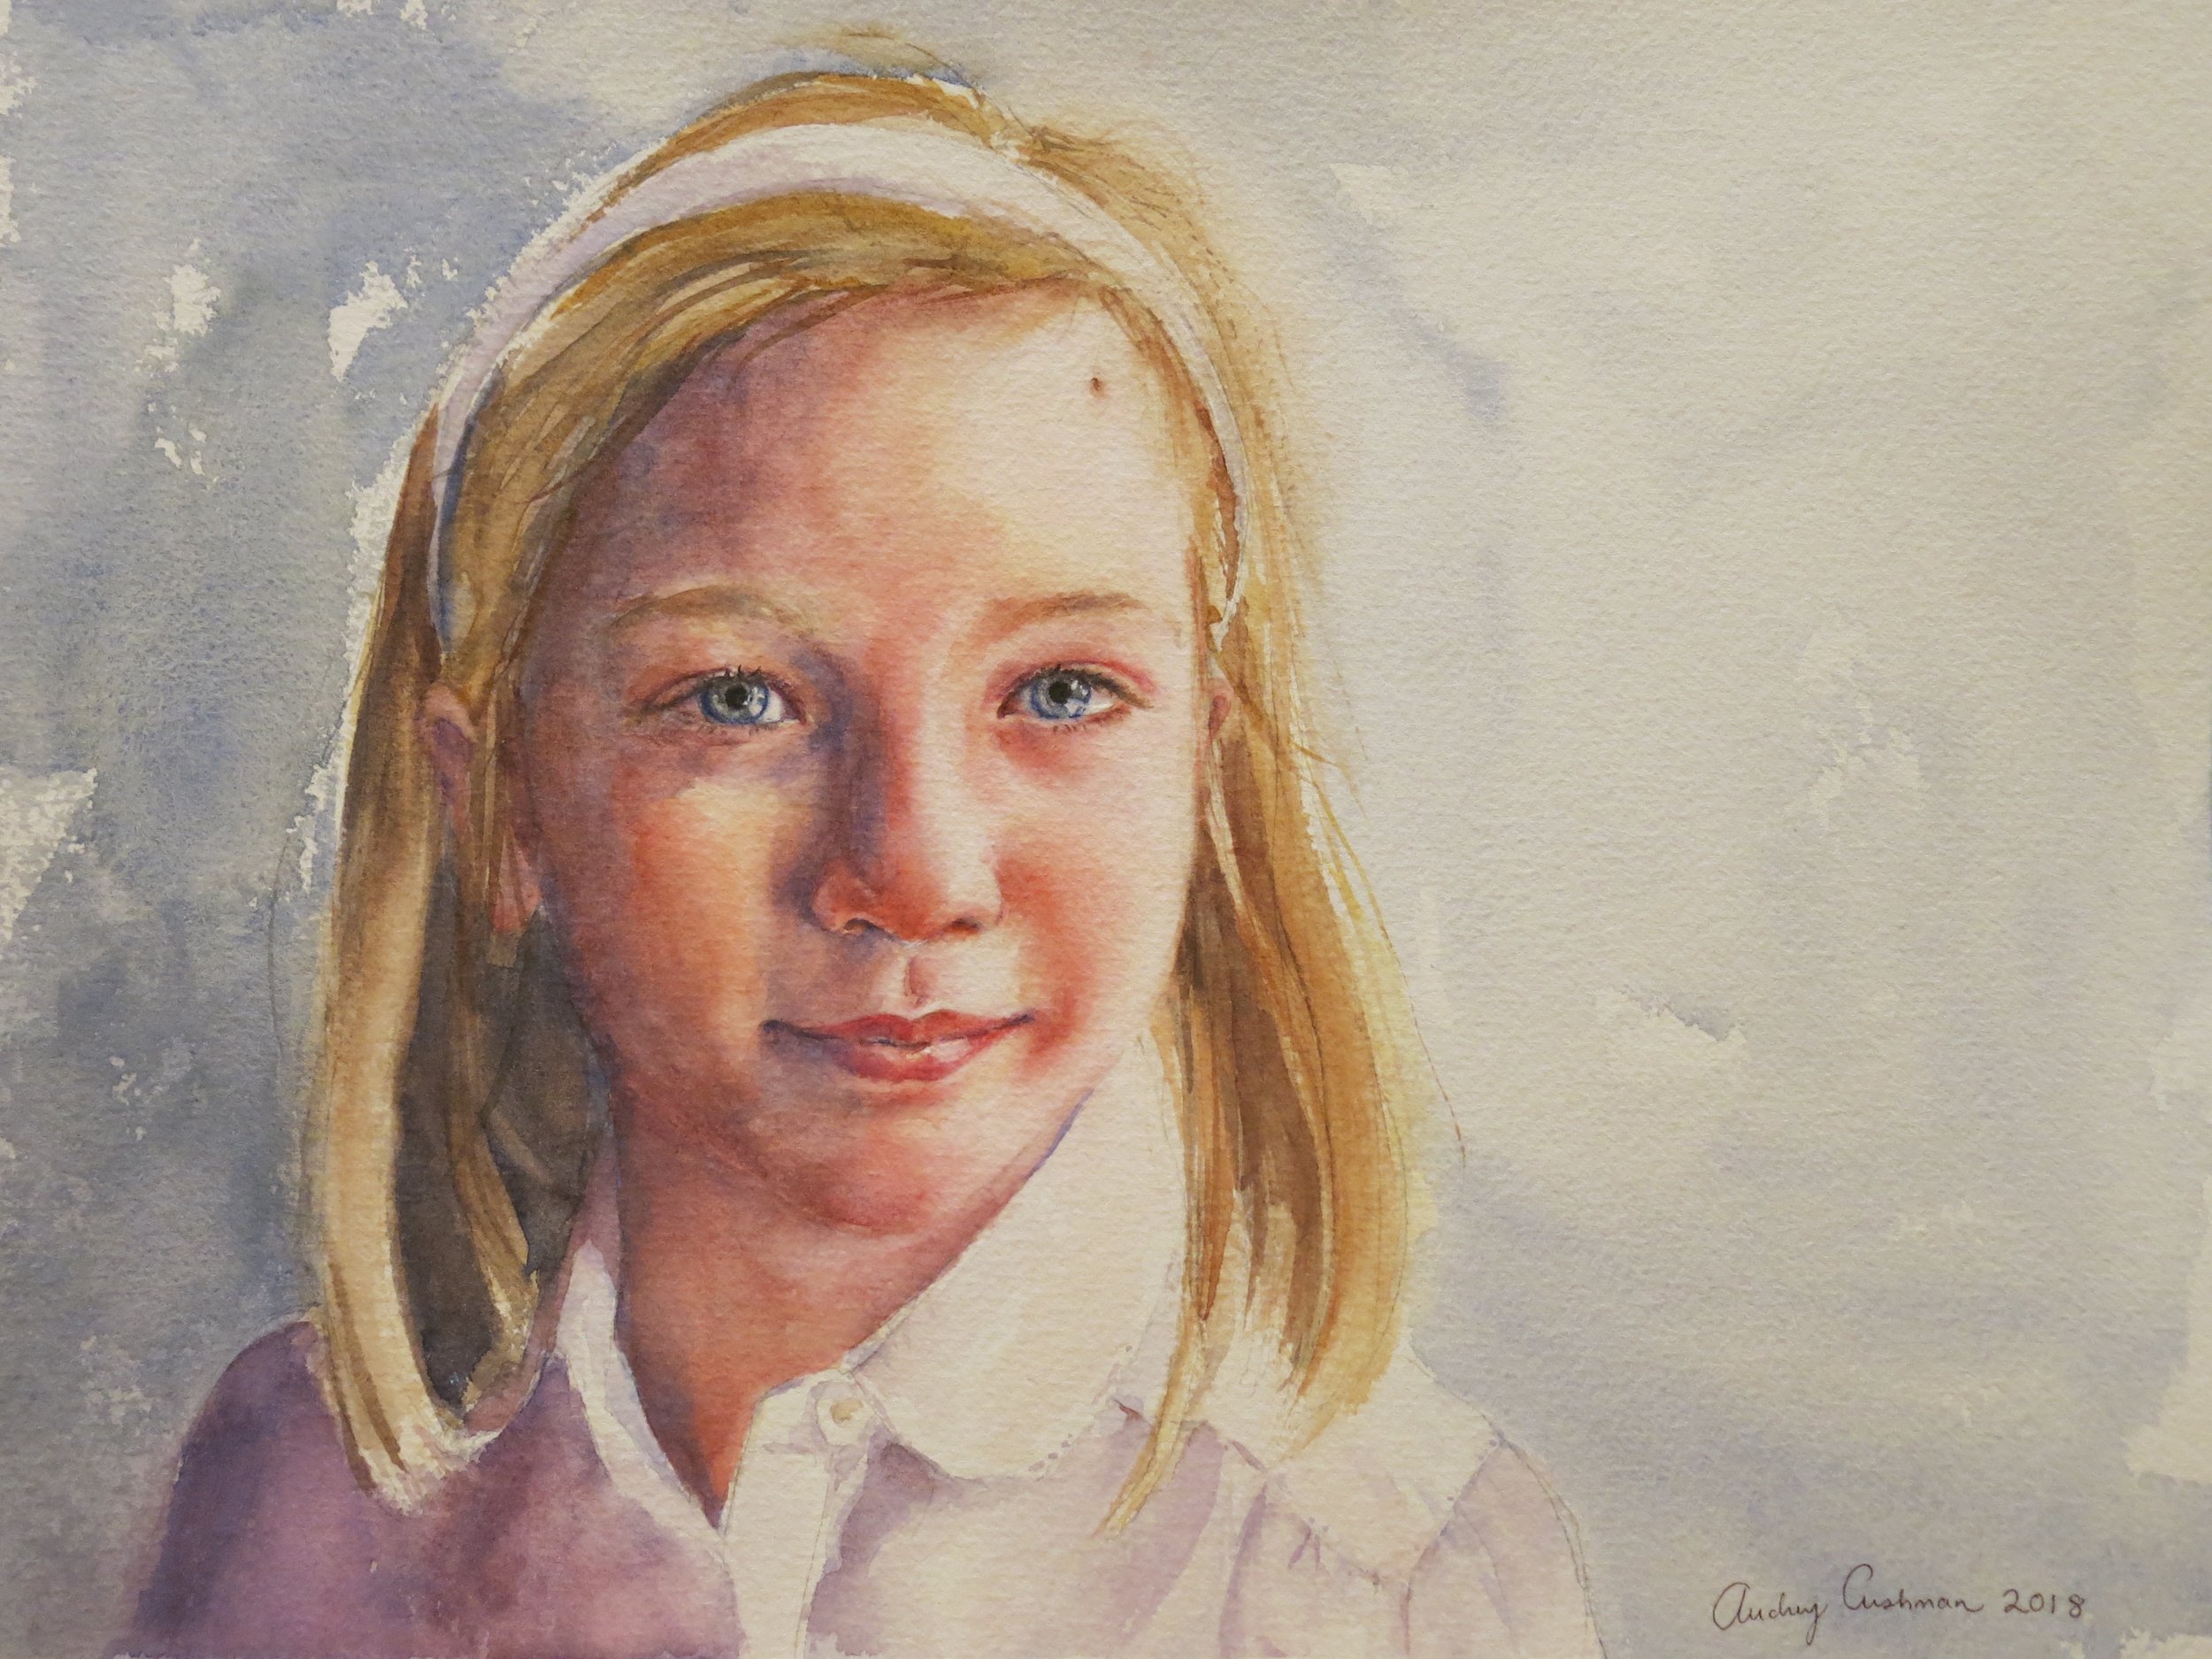   Anna Reese   Watercolor on paper, 16 x 12"  SOLD 